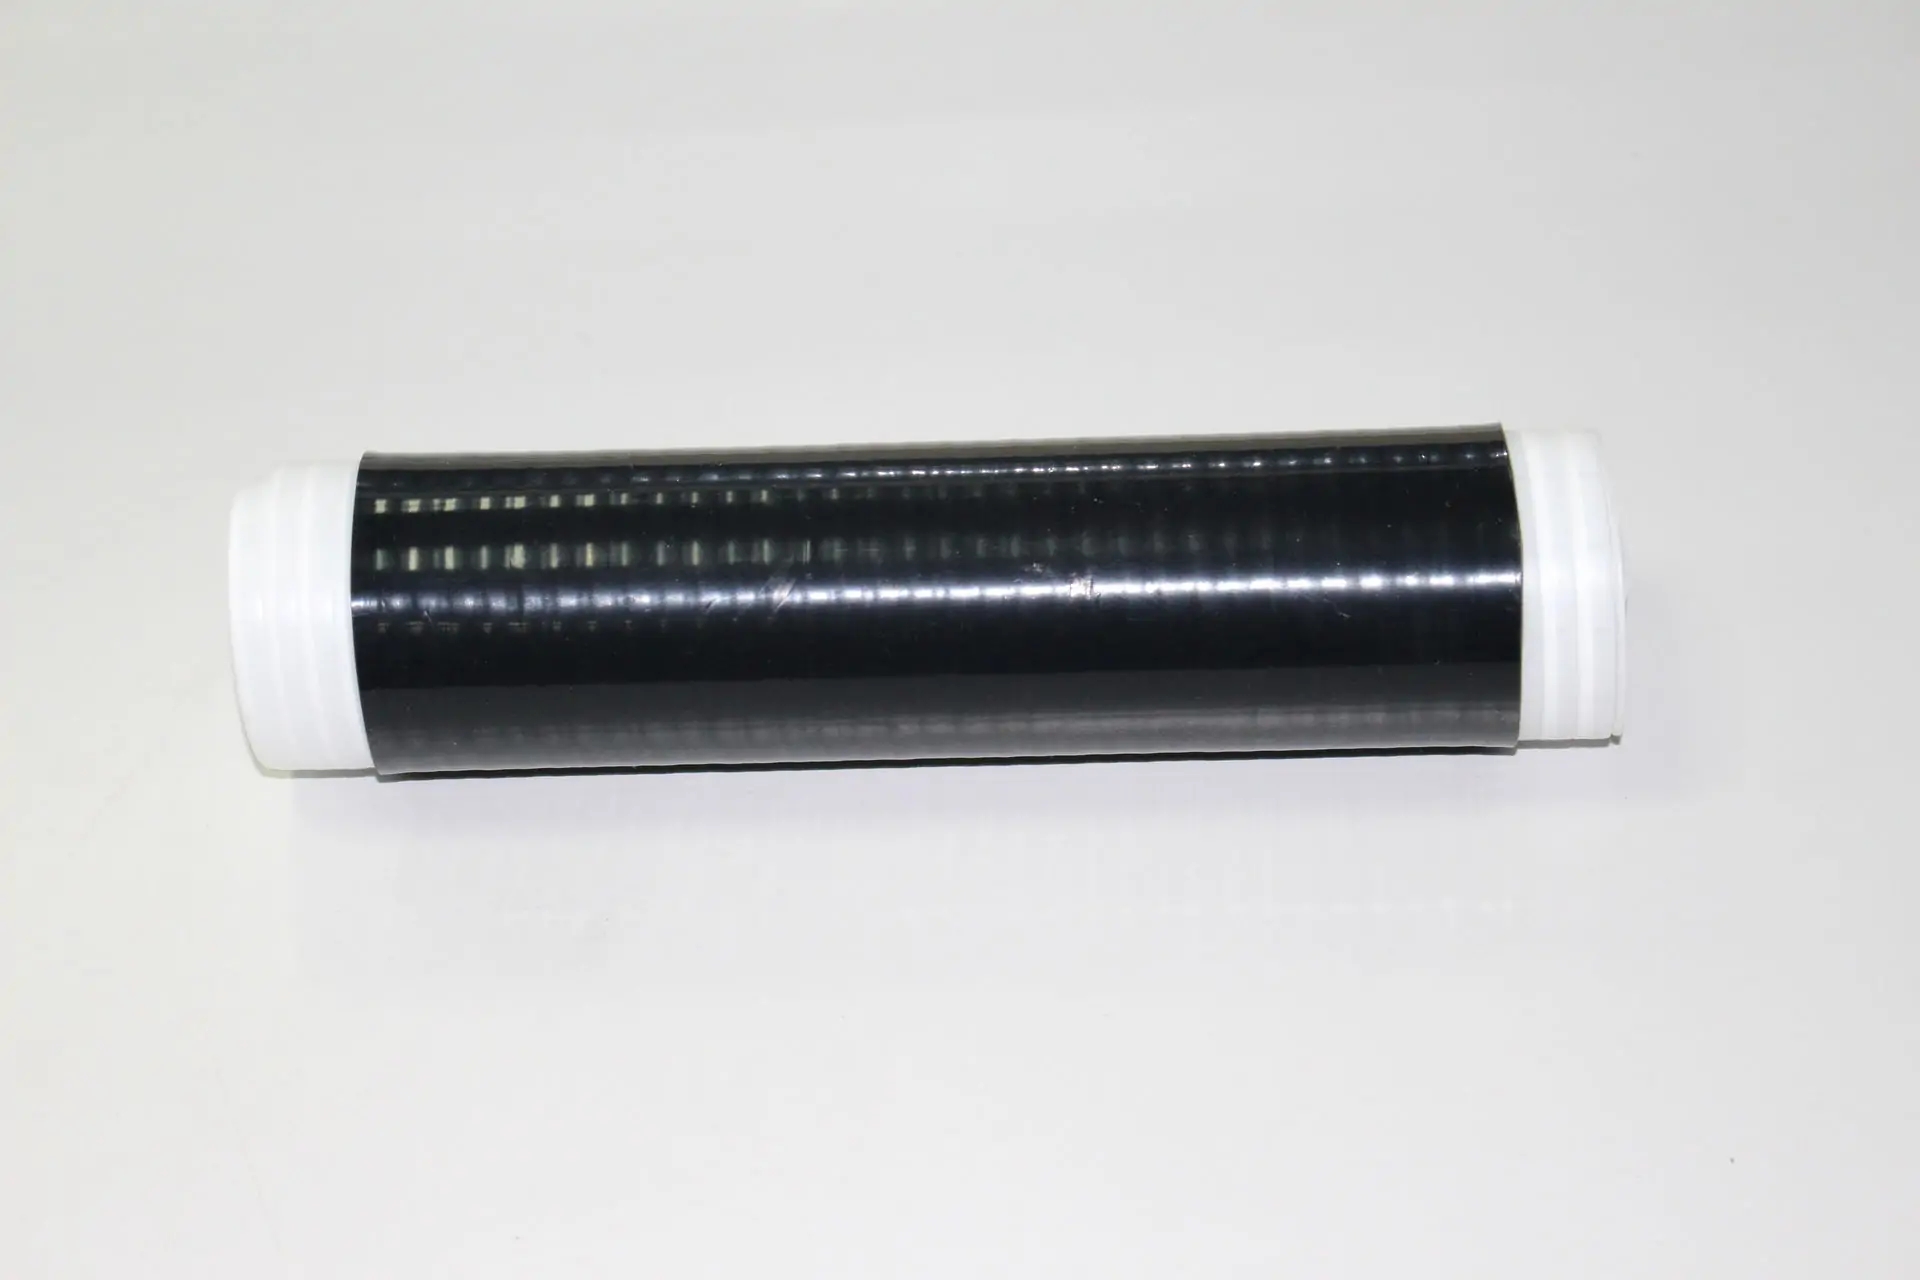 Silicone Rubber Cold Shrink Tube